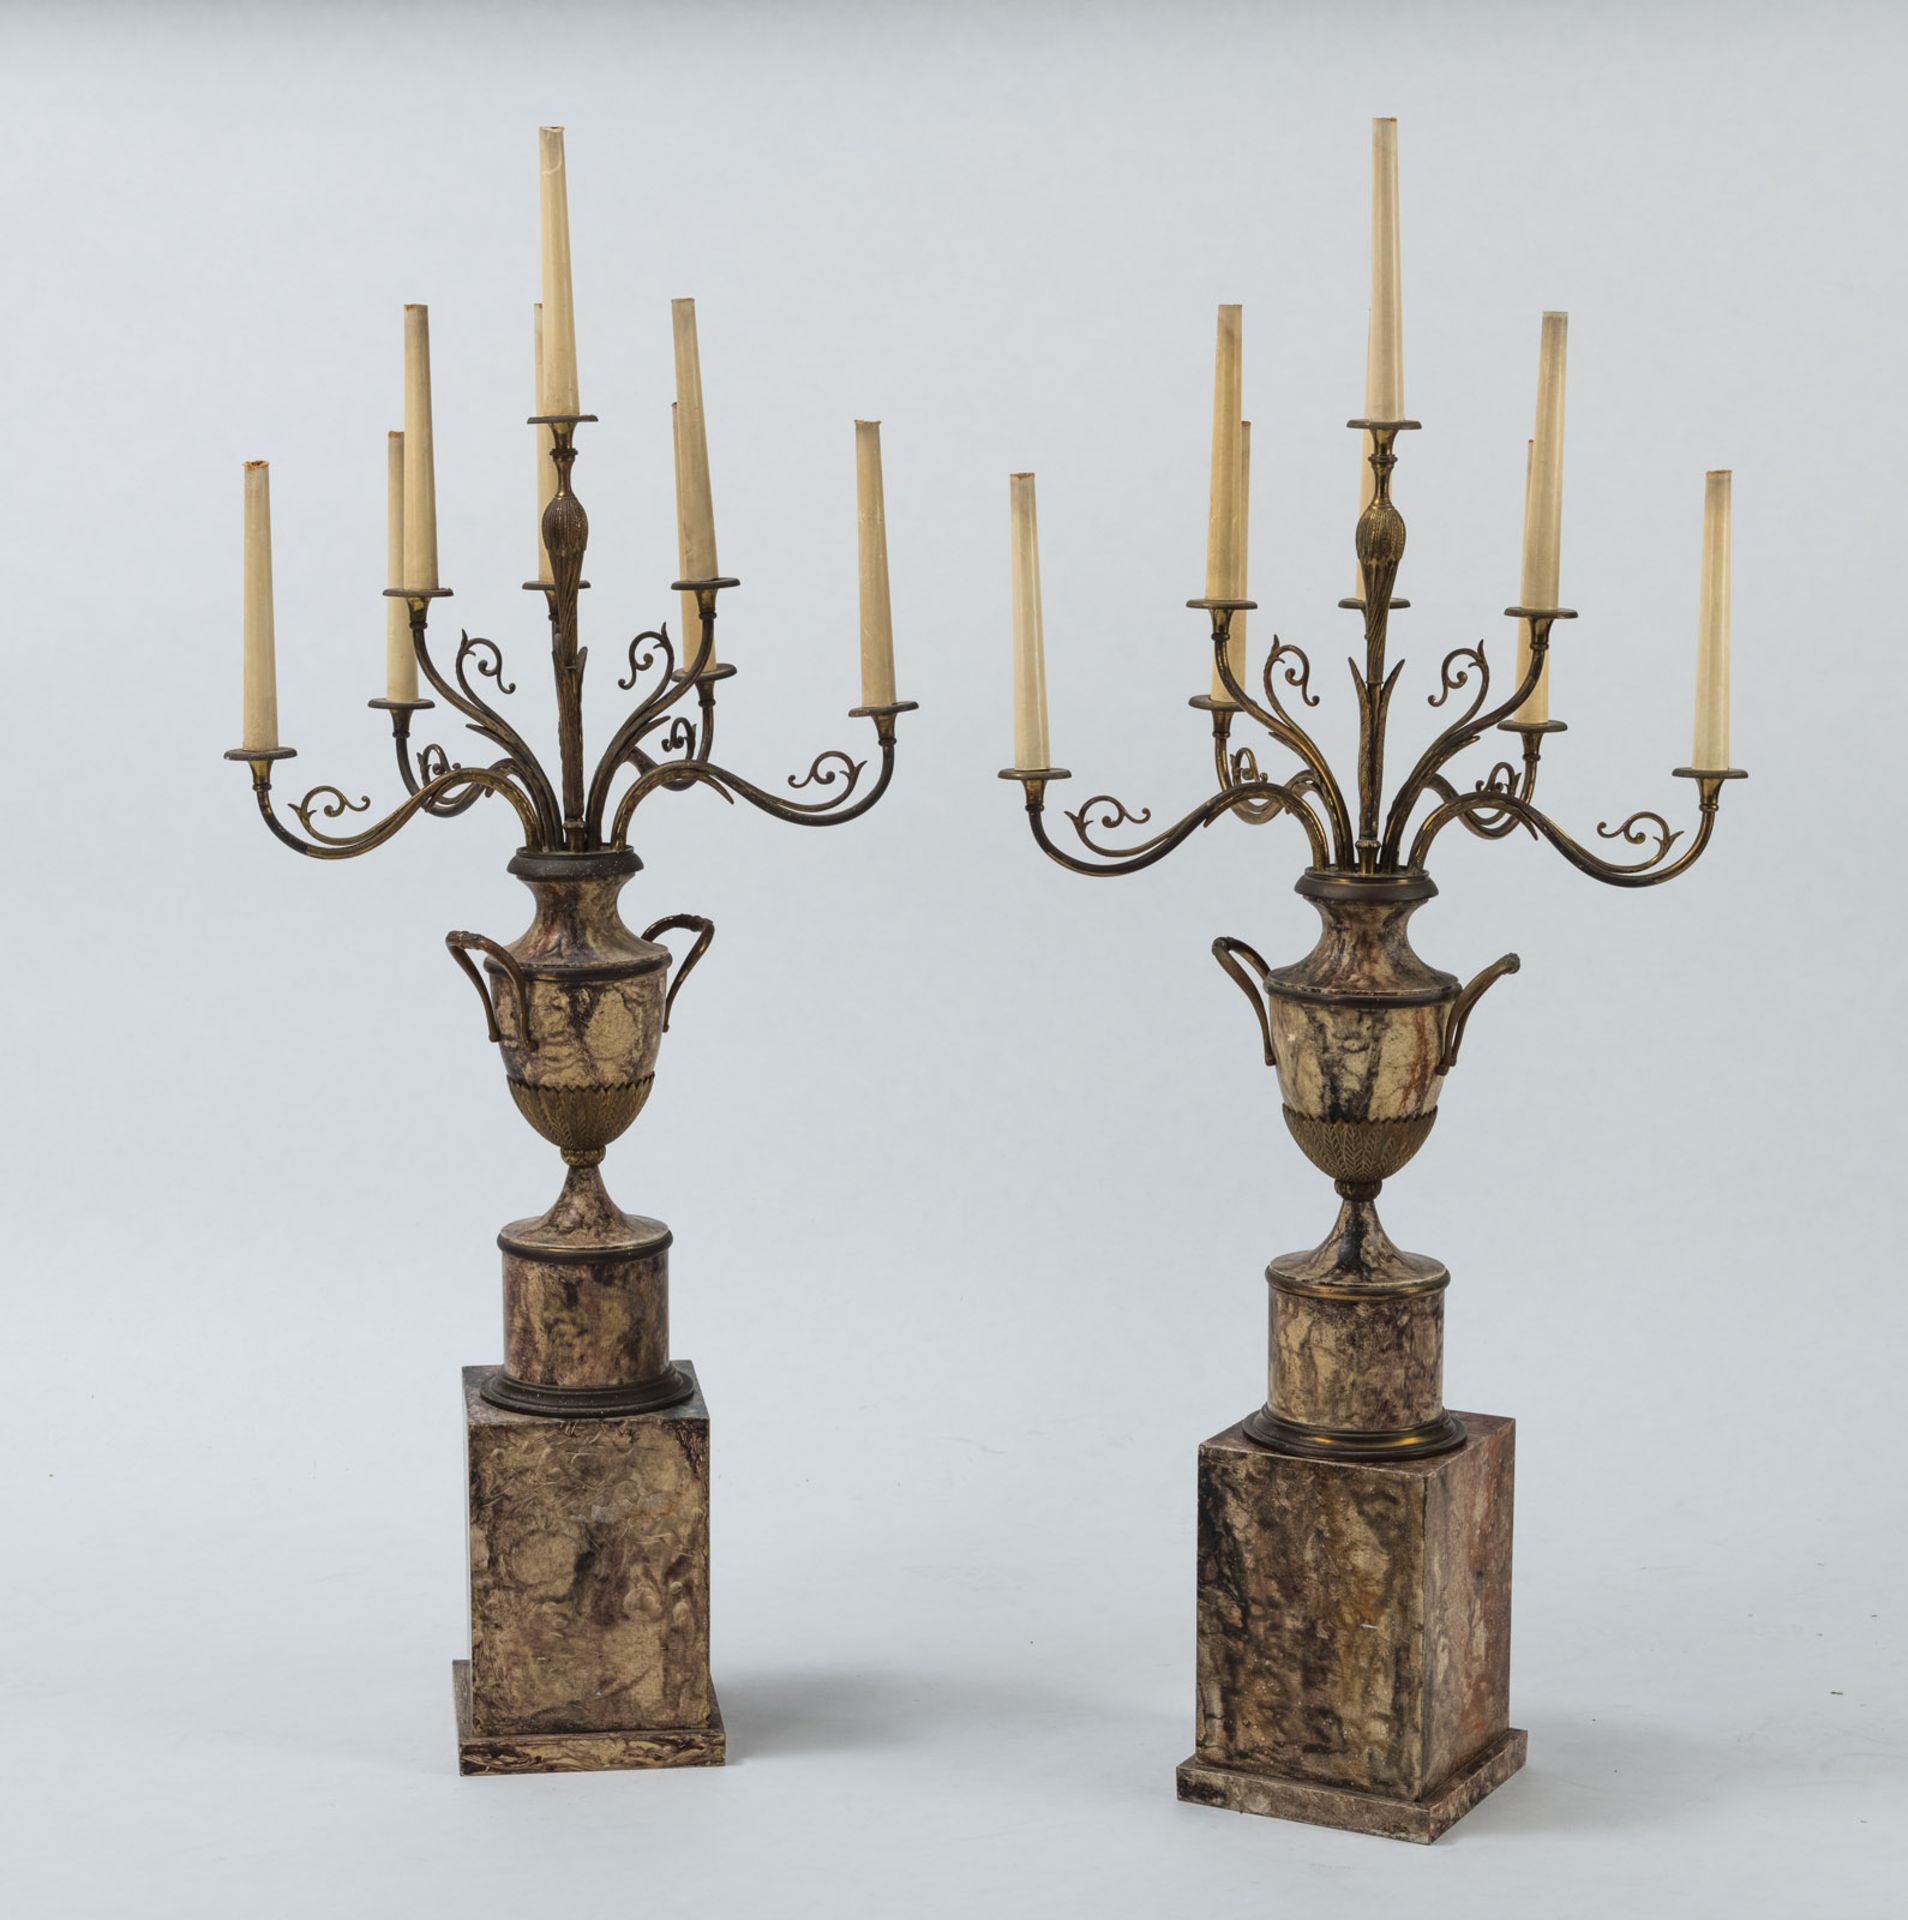 A PAIR OF EIGHT LIGHT PAINTED METAL BRASS AND WOOD CANDELABRA "ARTE POVERA" - Image 2 of 2